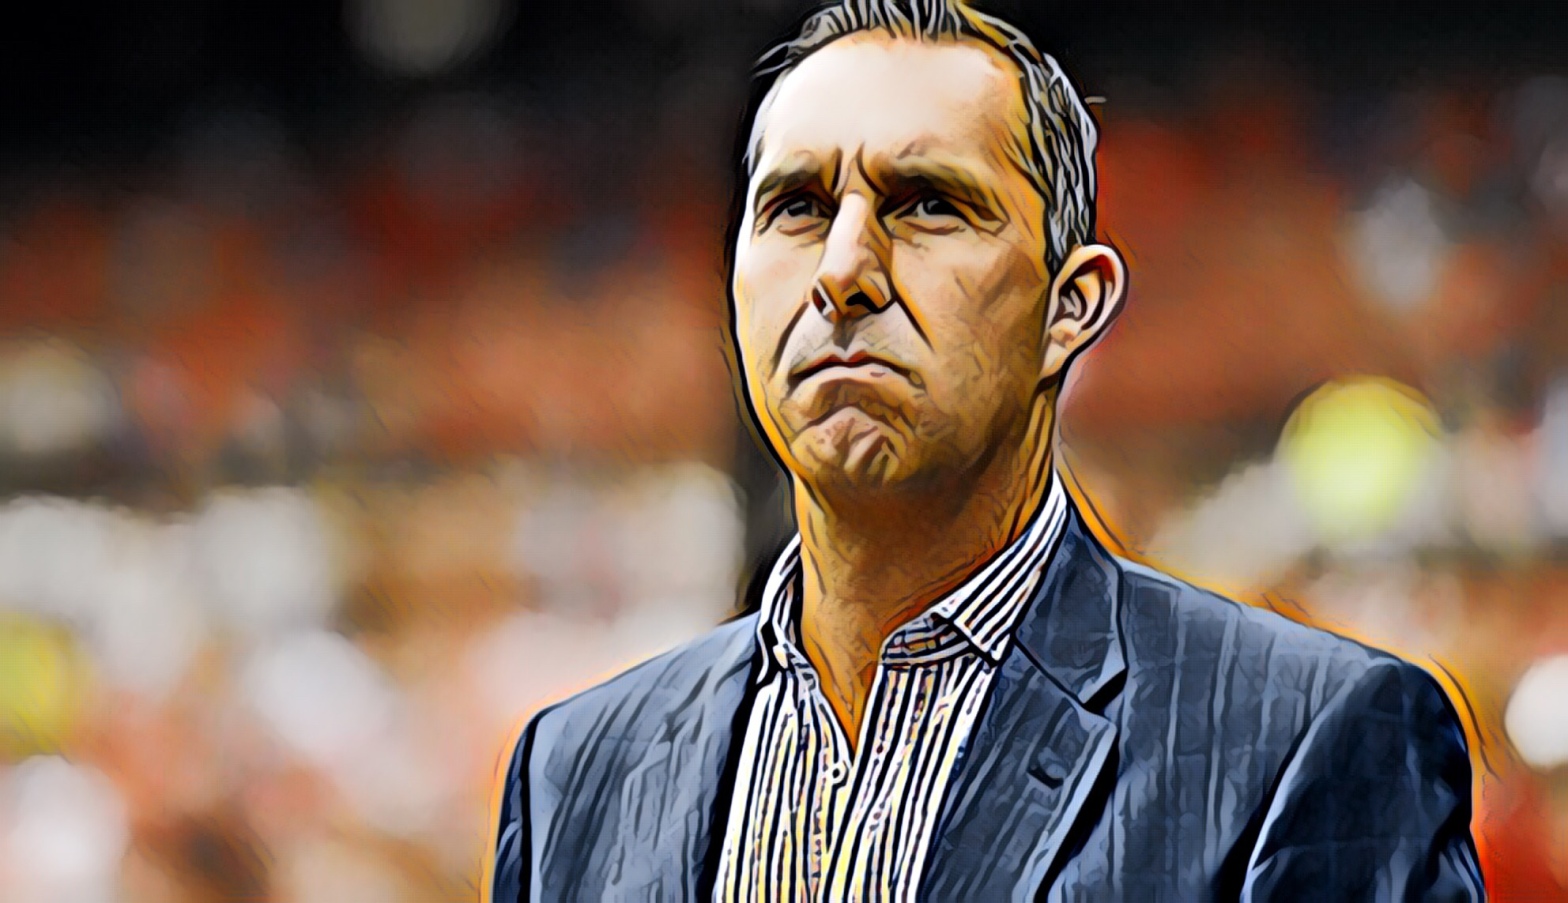 St. Louis Cardinals: What Are Your Thoughts On John Mozeliak? – Cardinals Nation 24/7